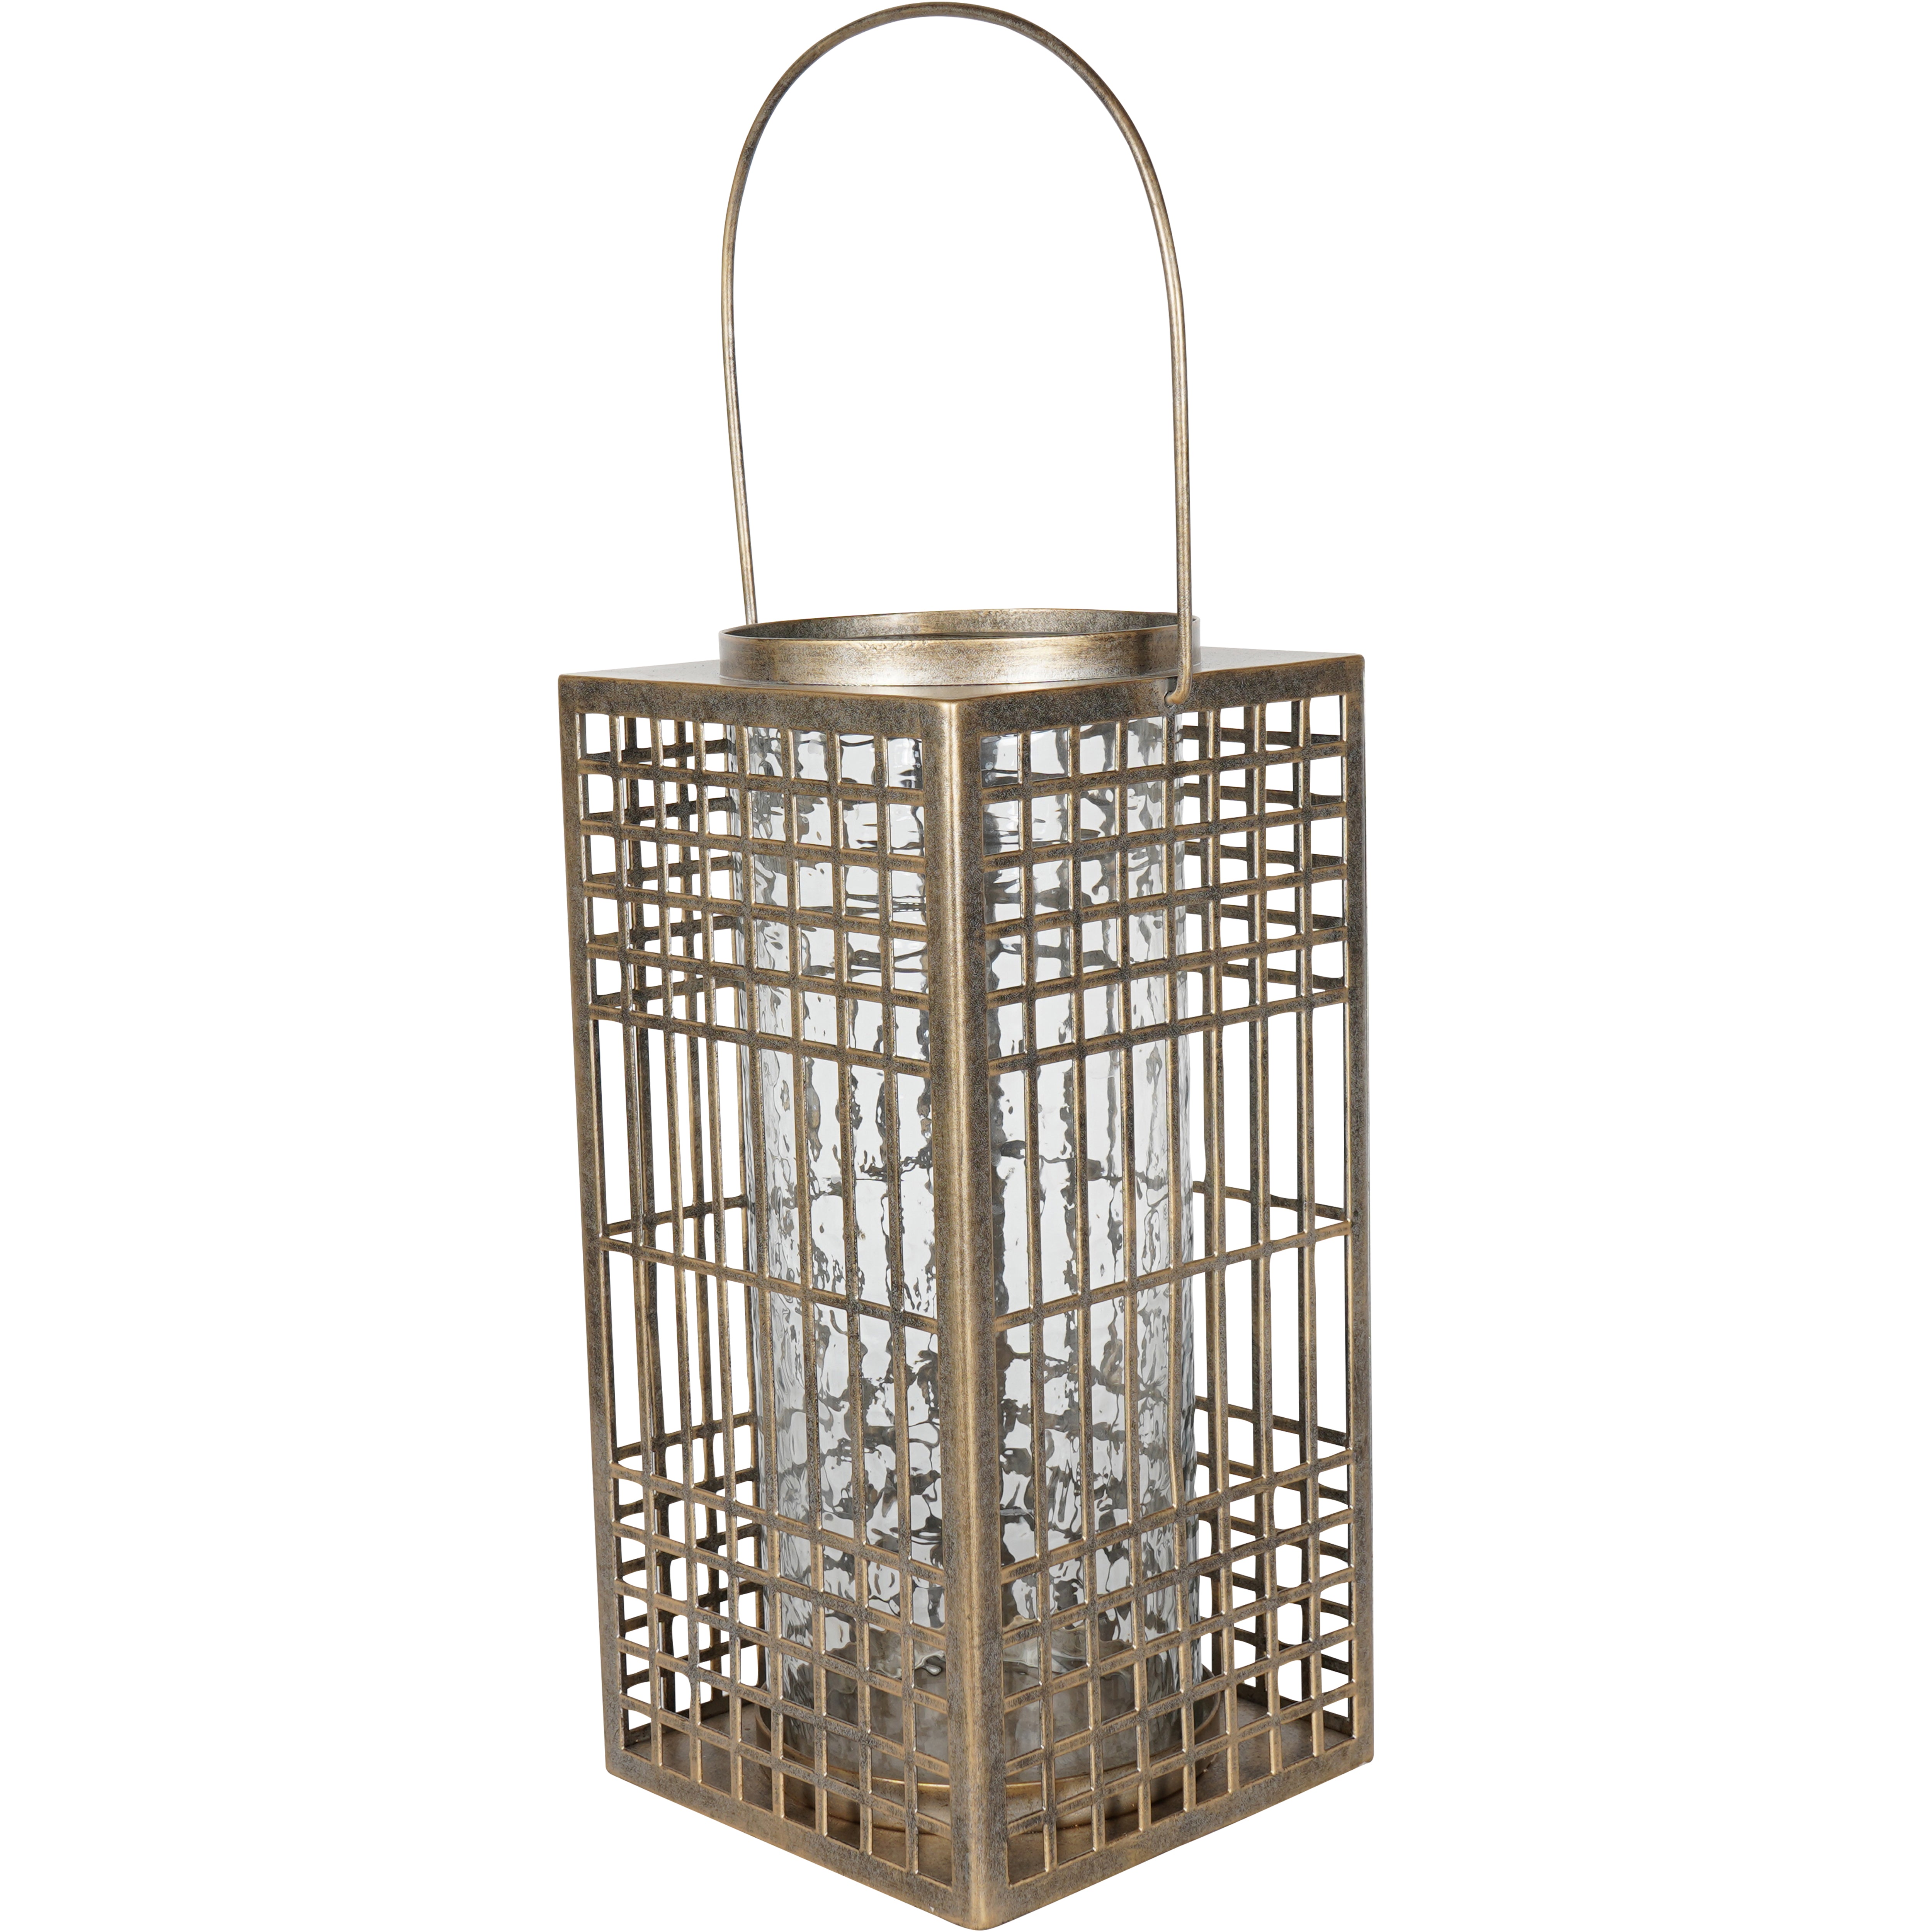 Barbosa Fretwork Square Lantern in Aged Gold with Glass Flute 41cm